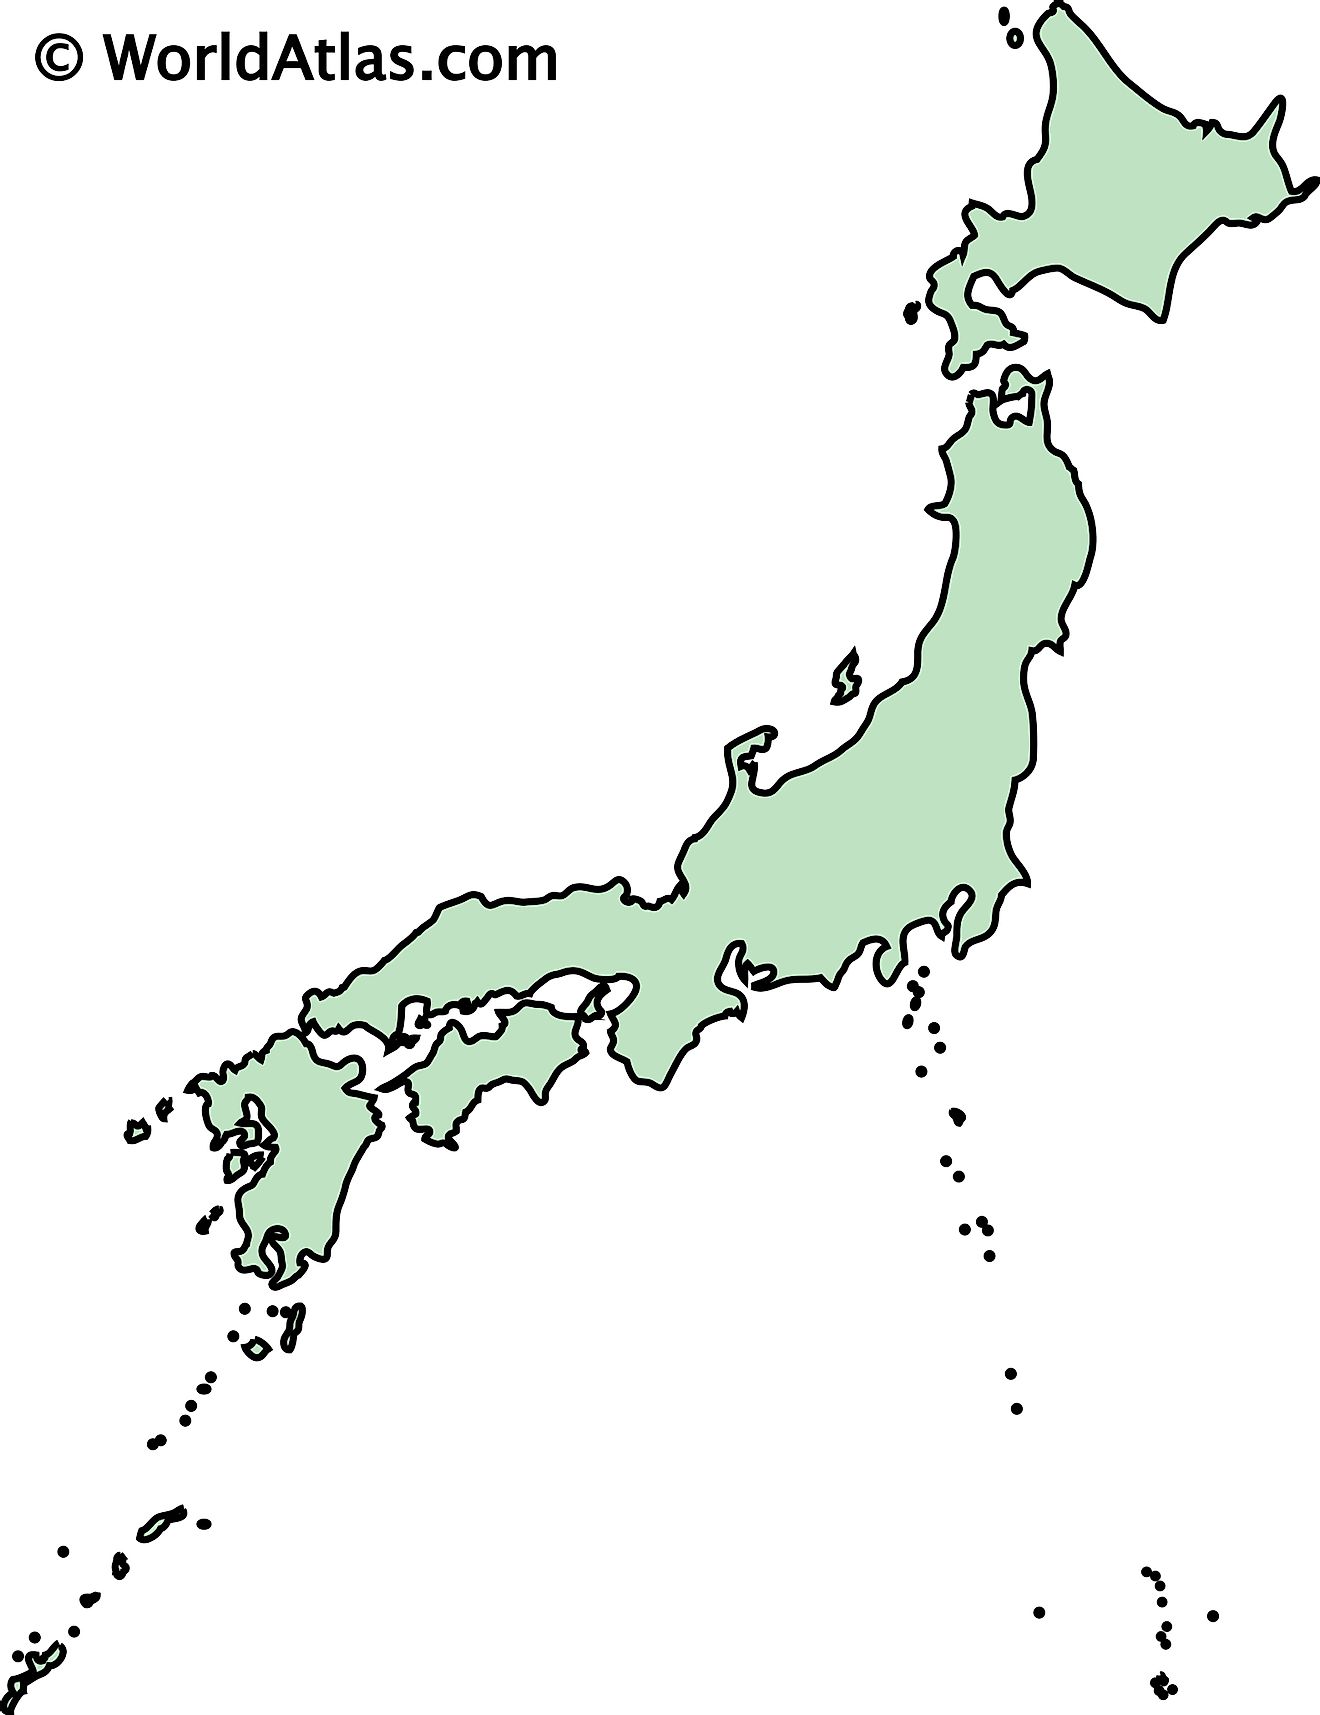 Outline Map of Japan